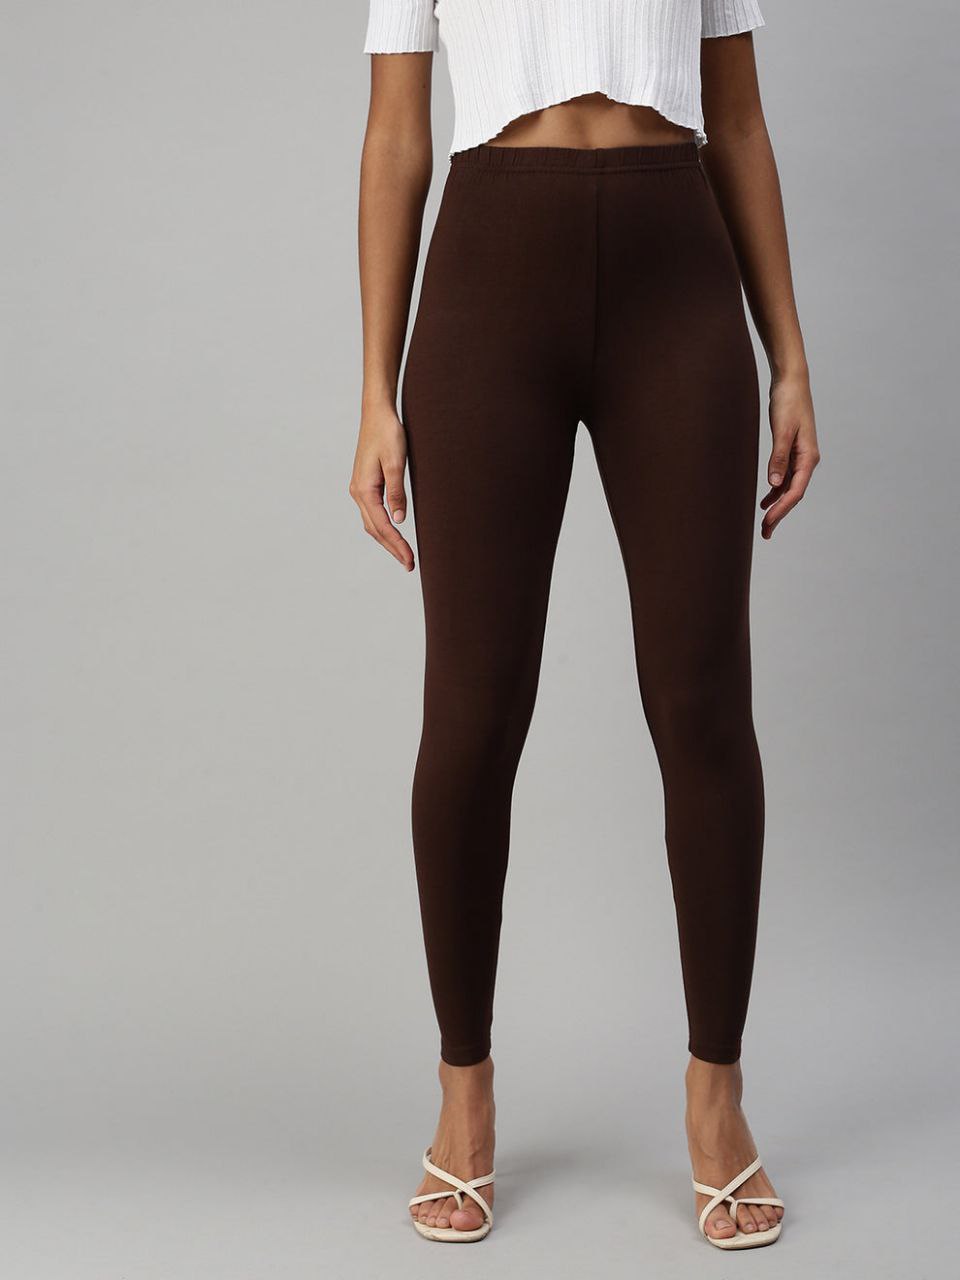 Attractive Brown Color Cotton Ankle Length Leggings For Women